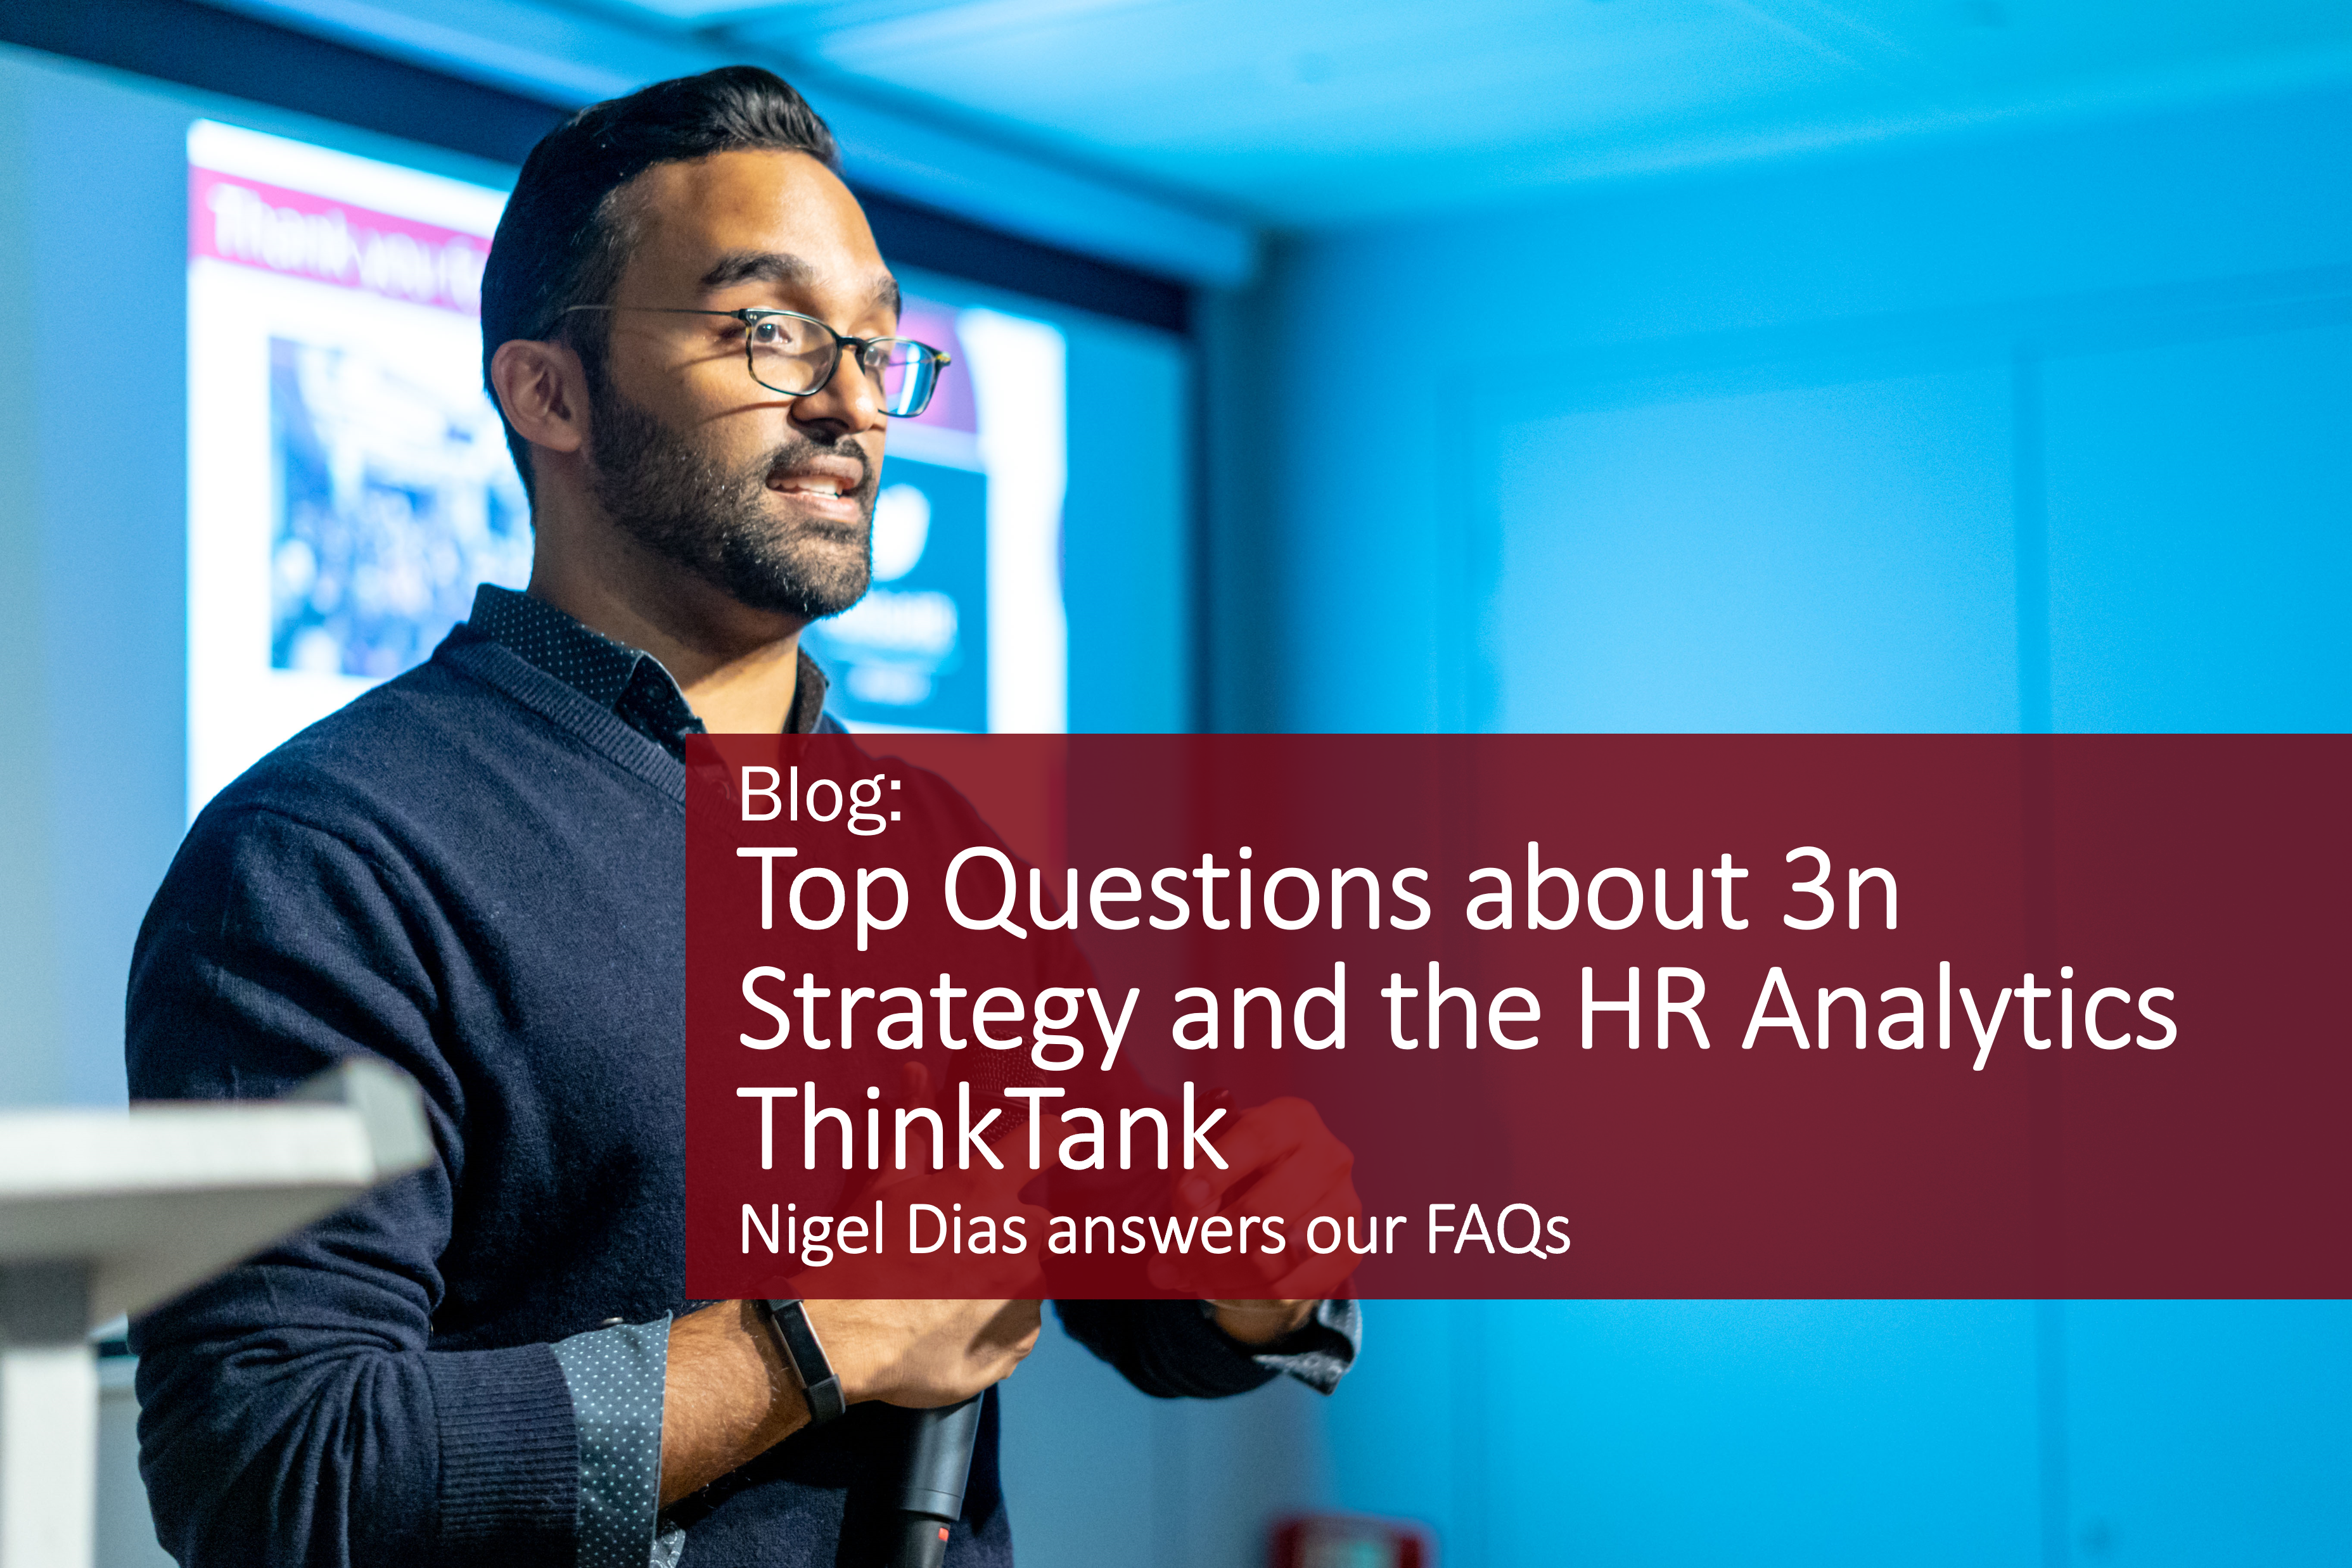 Top Questions about 3n Strategy and the HR Analytics ThinkTank